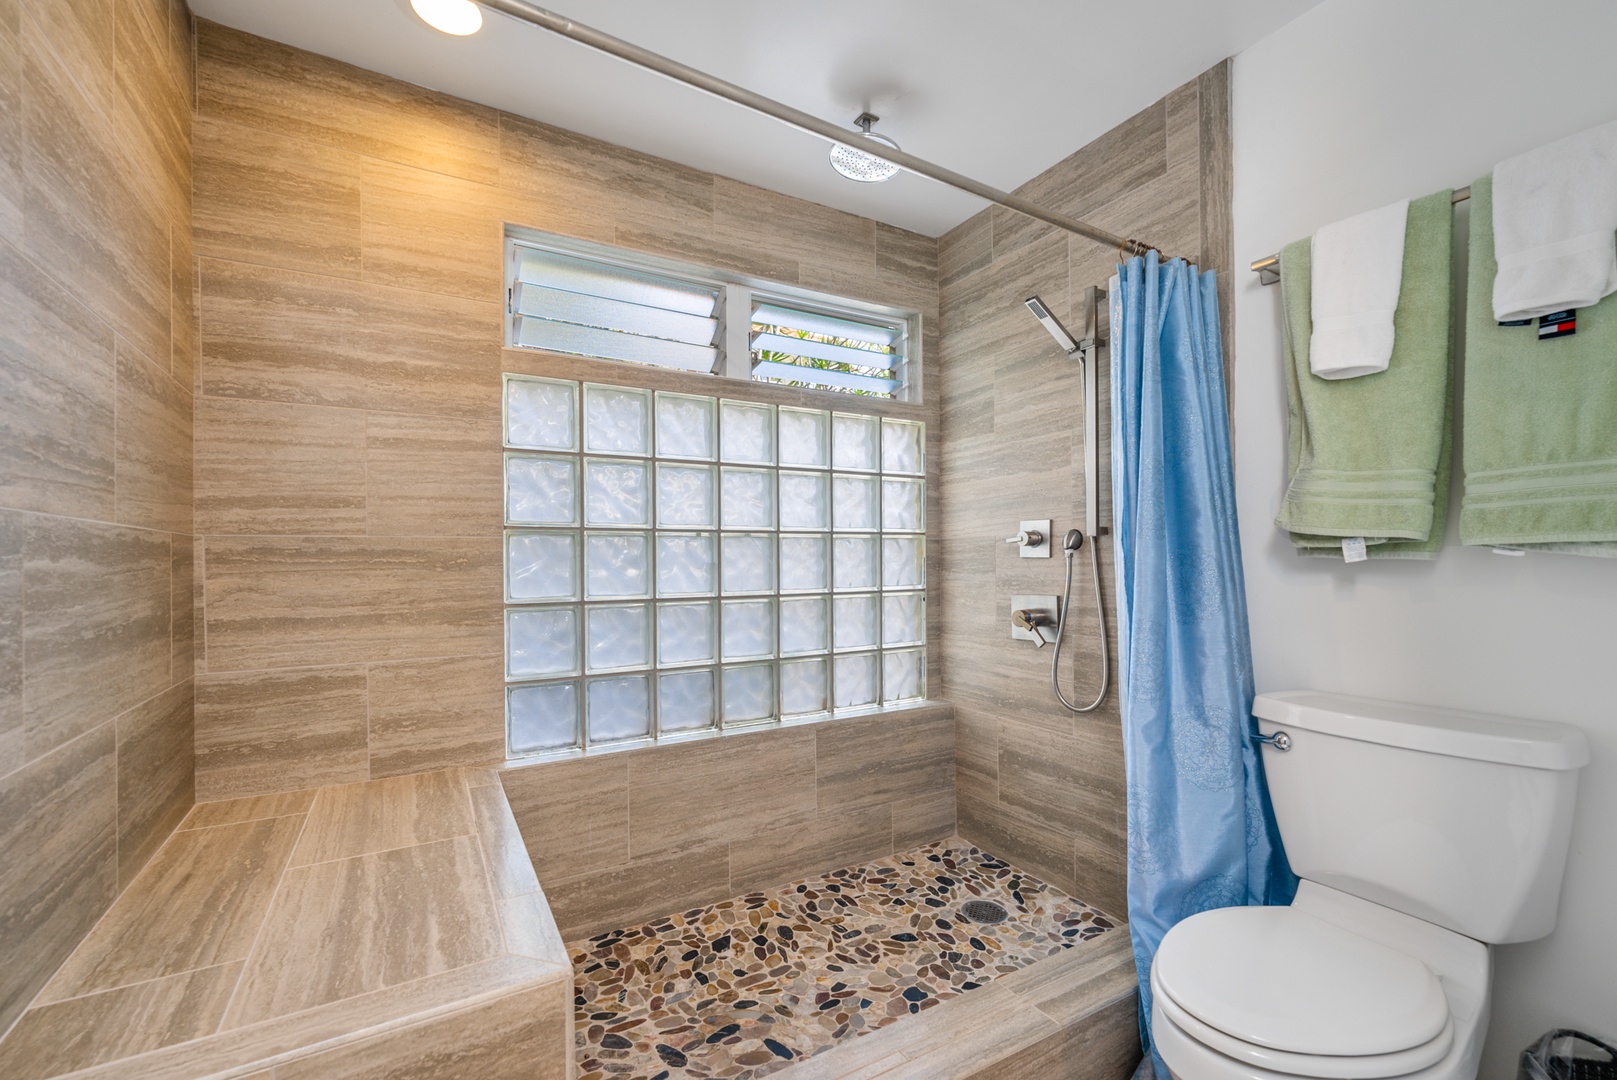 Bathroom shared with walk in shower